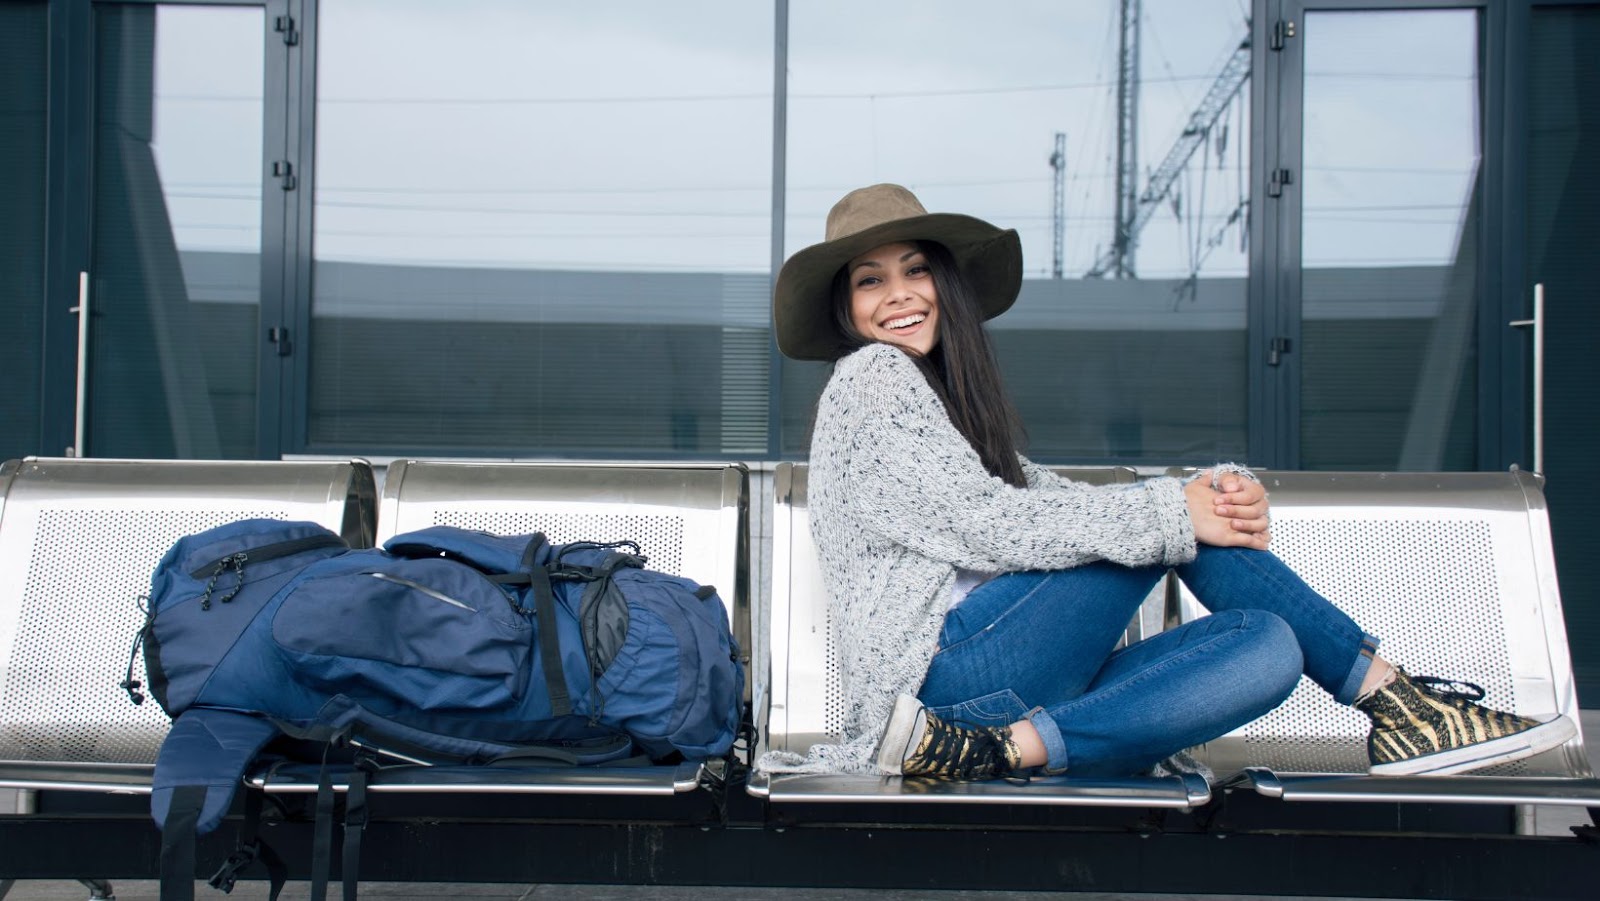 5 Things to Consider If You're Going On Your First Vacation Alone